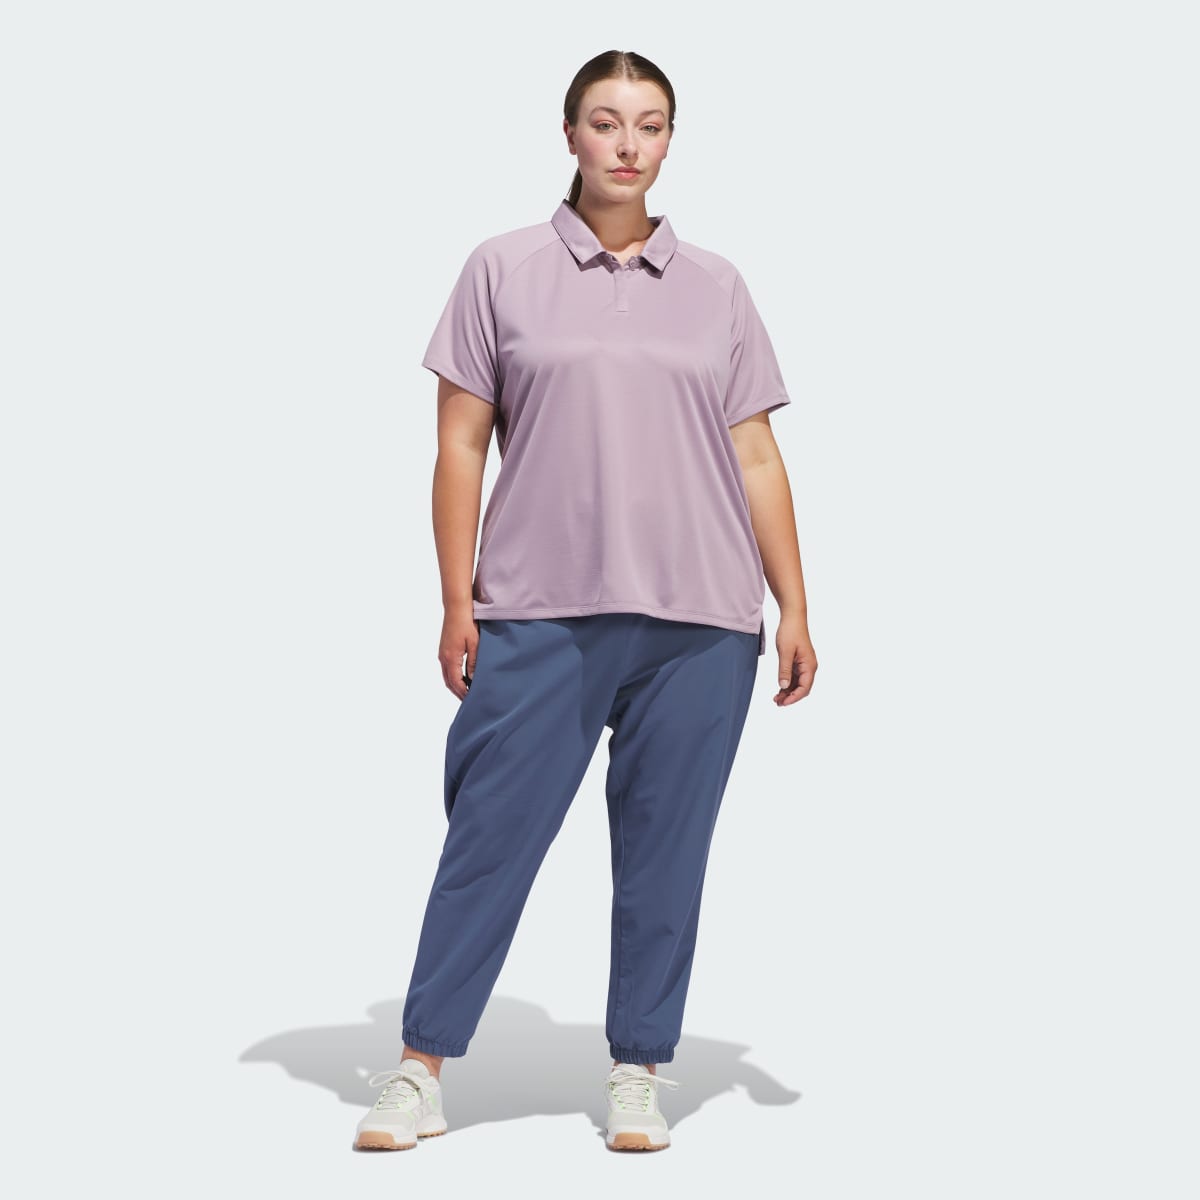 Adidas Women's Ultimate365 Joggers (Plus Size). 5